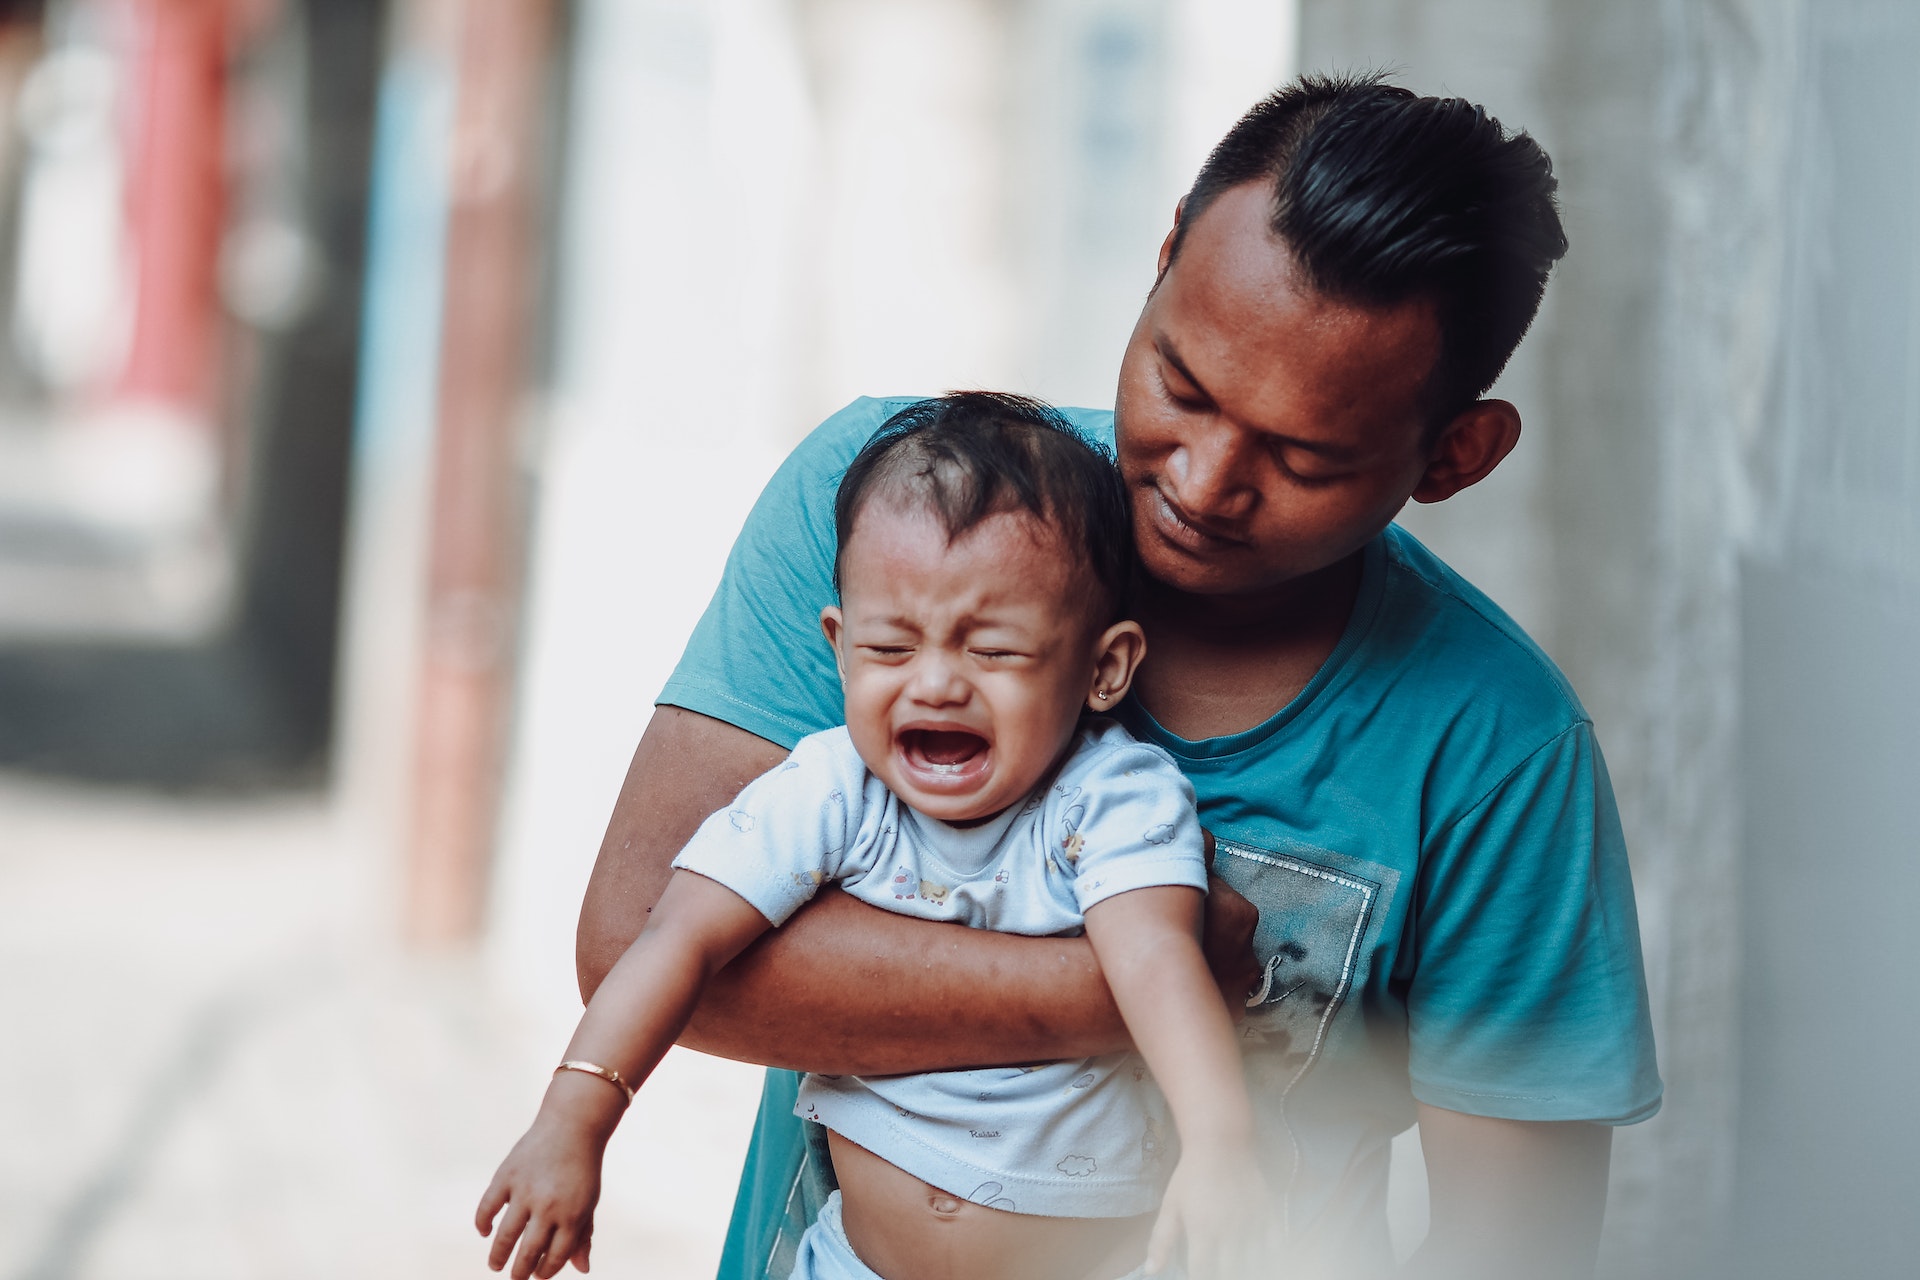 A man holding a crying child with tooth pain